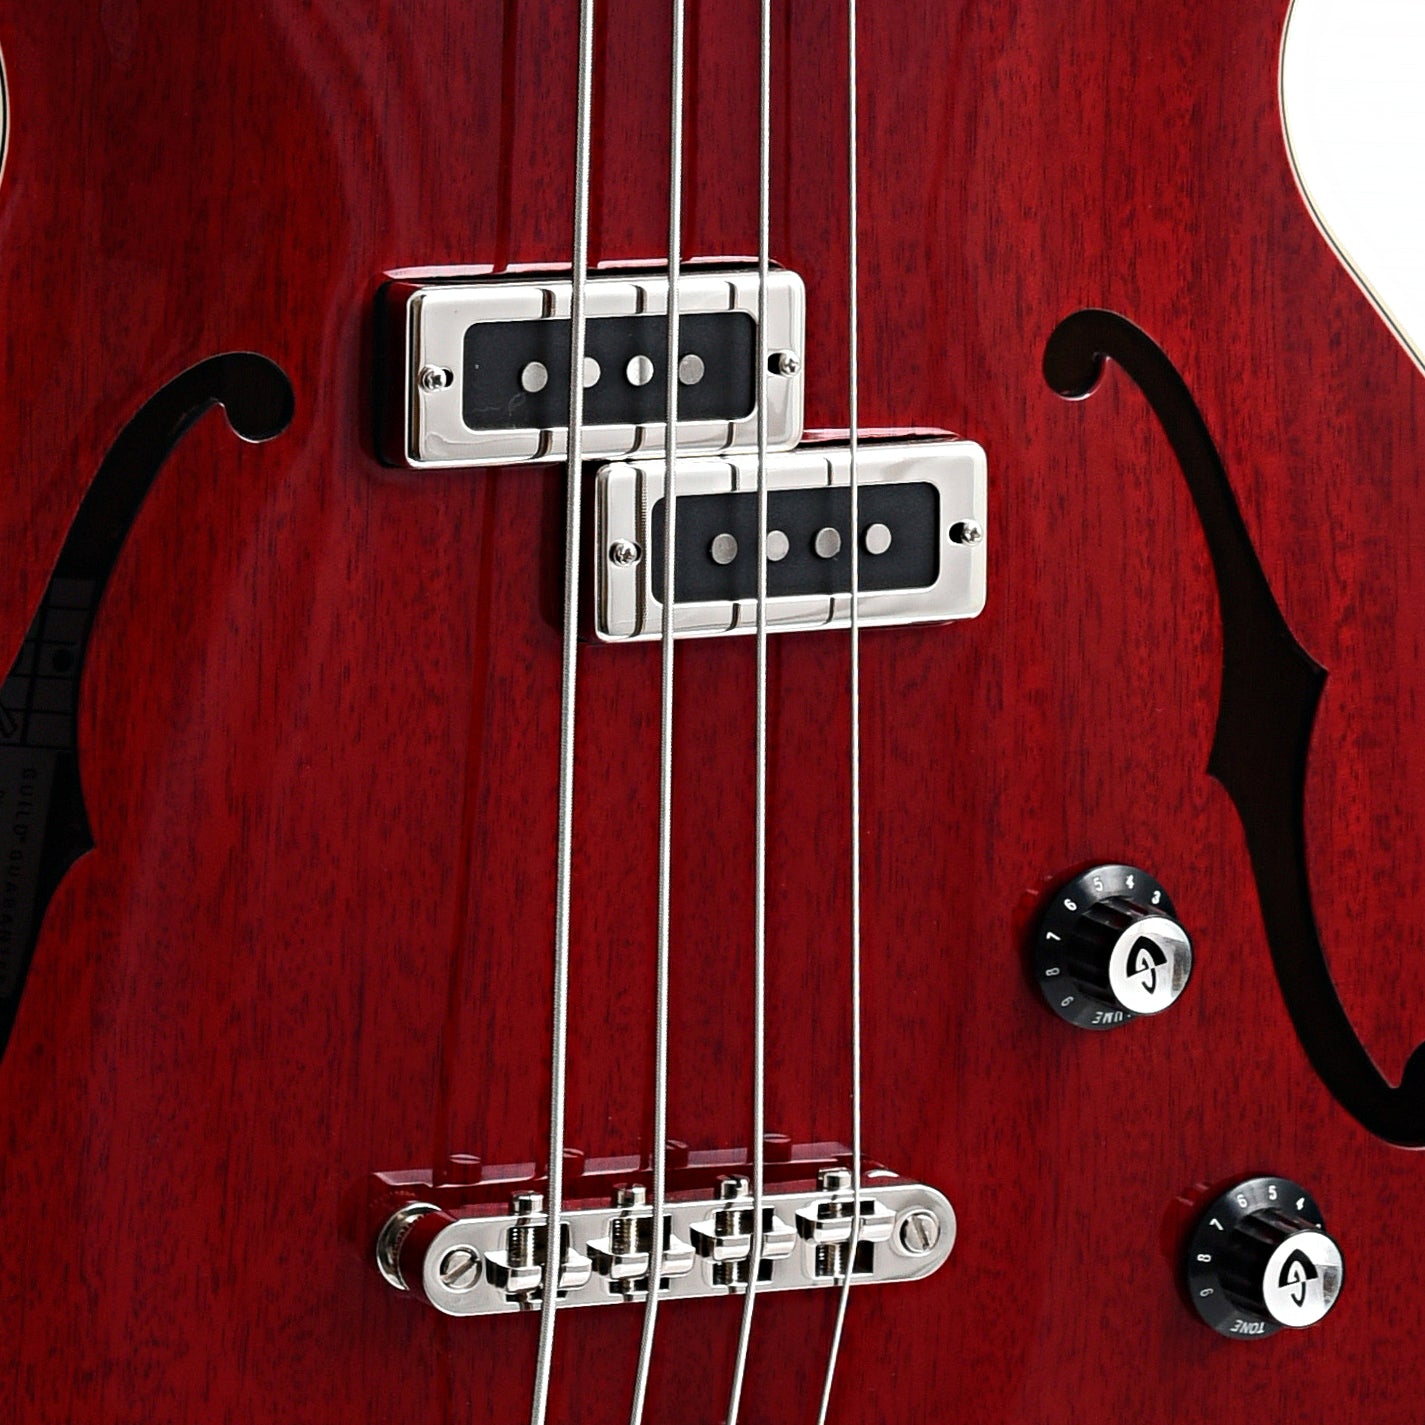 Image 4 of Guild Starfire 1 Bass, Cherry Red - SKU# GSF1BASS-CHR : Product Type Hollow Body Bass Guitars : Elderly Instruments